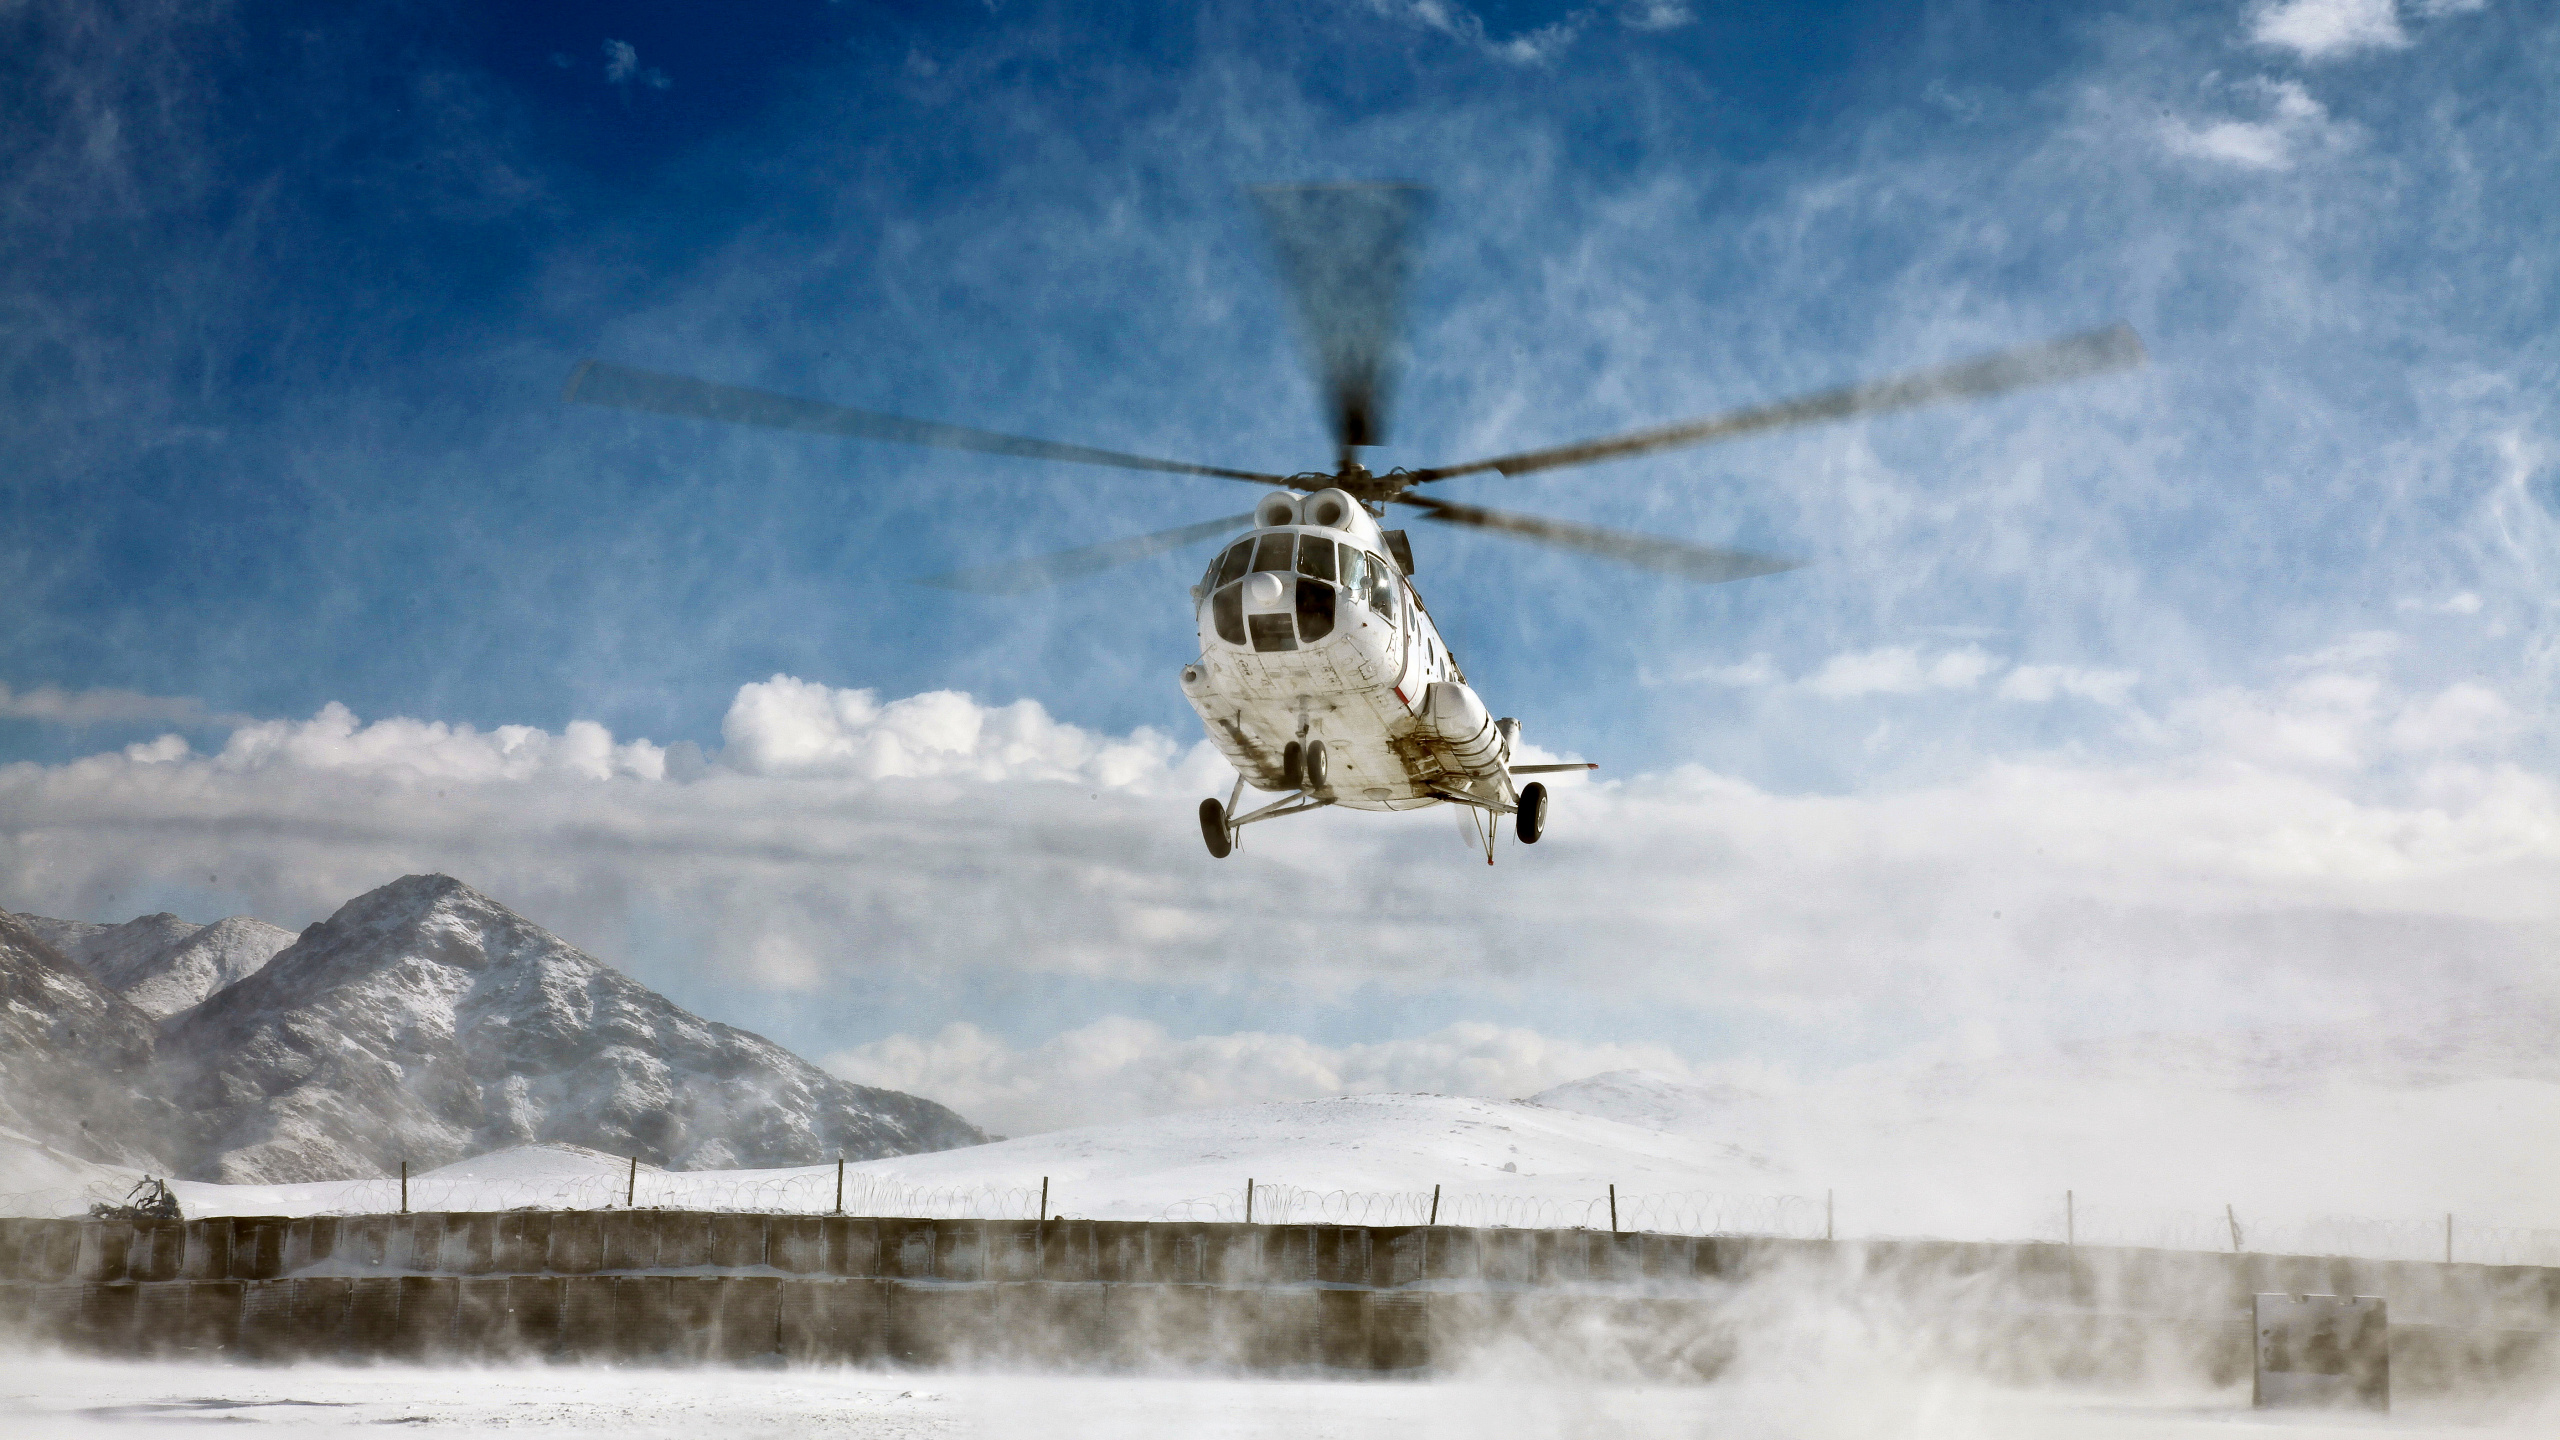 White and Black Helicopter Flying Over Snow Covered Mountain During Daytime. Wallpaper in 2560x1440 Resolution